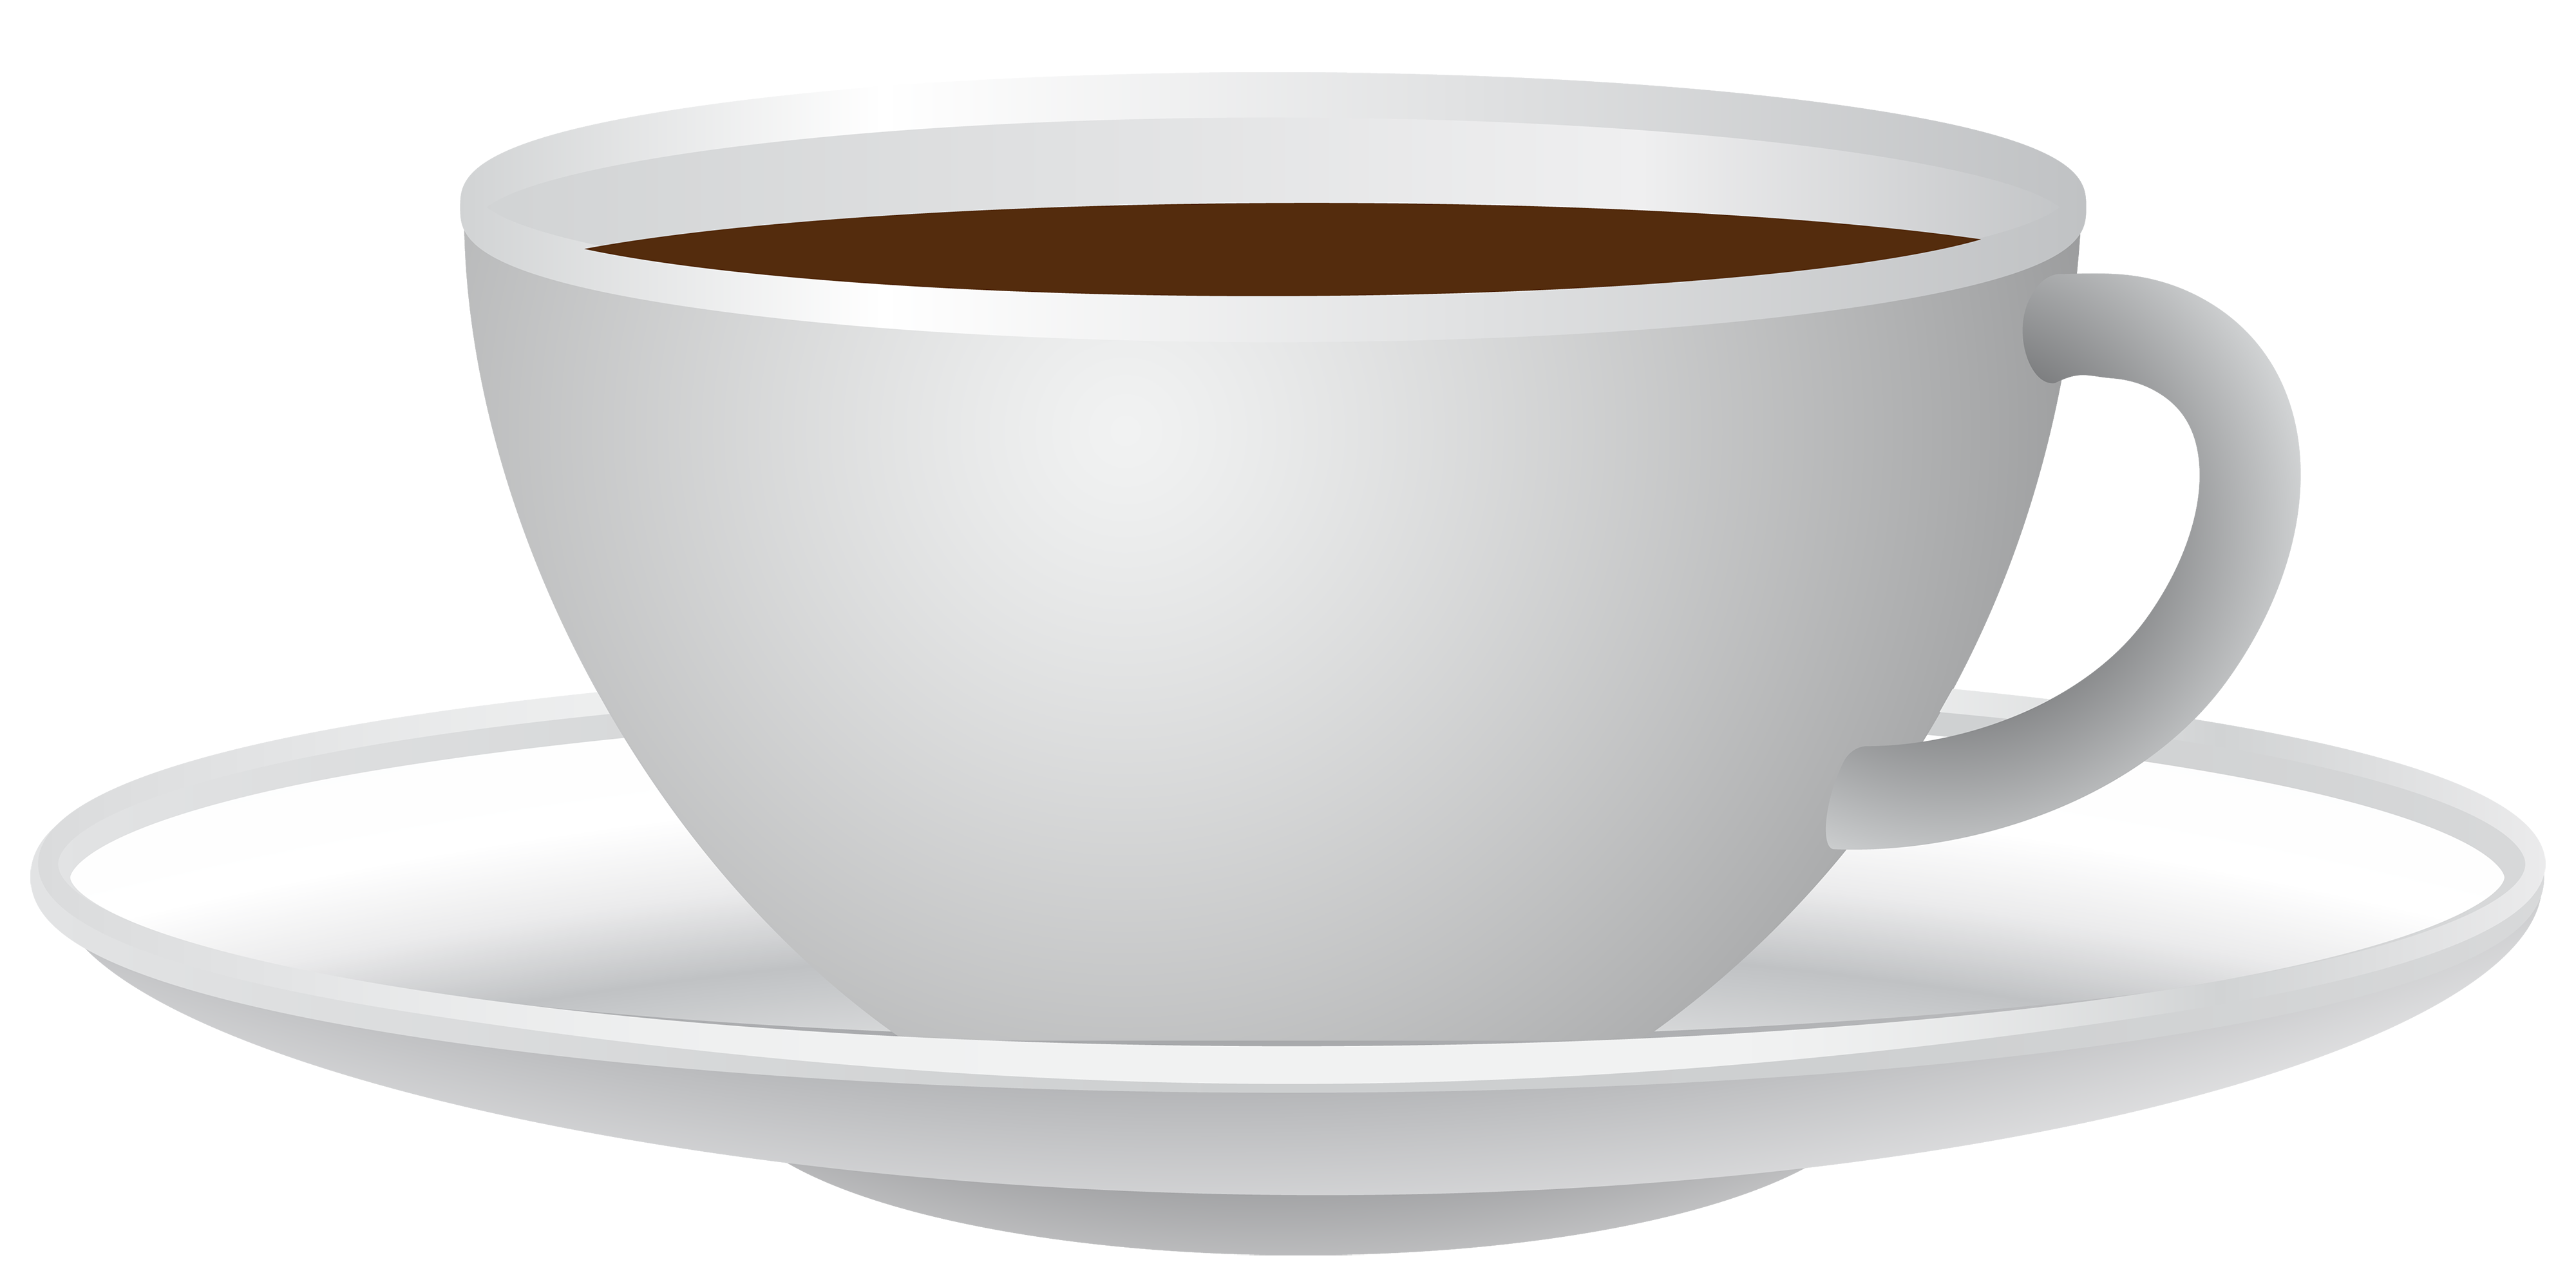 Coffee cup clipart web - Cliparting.com